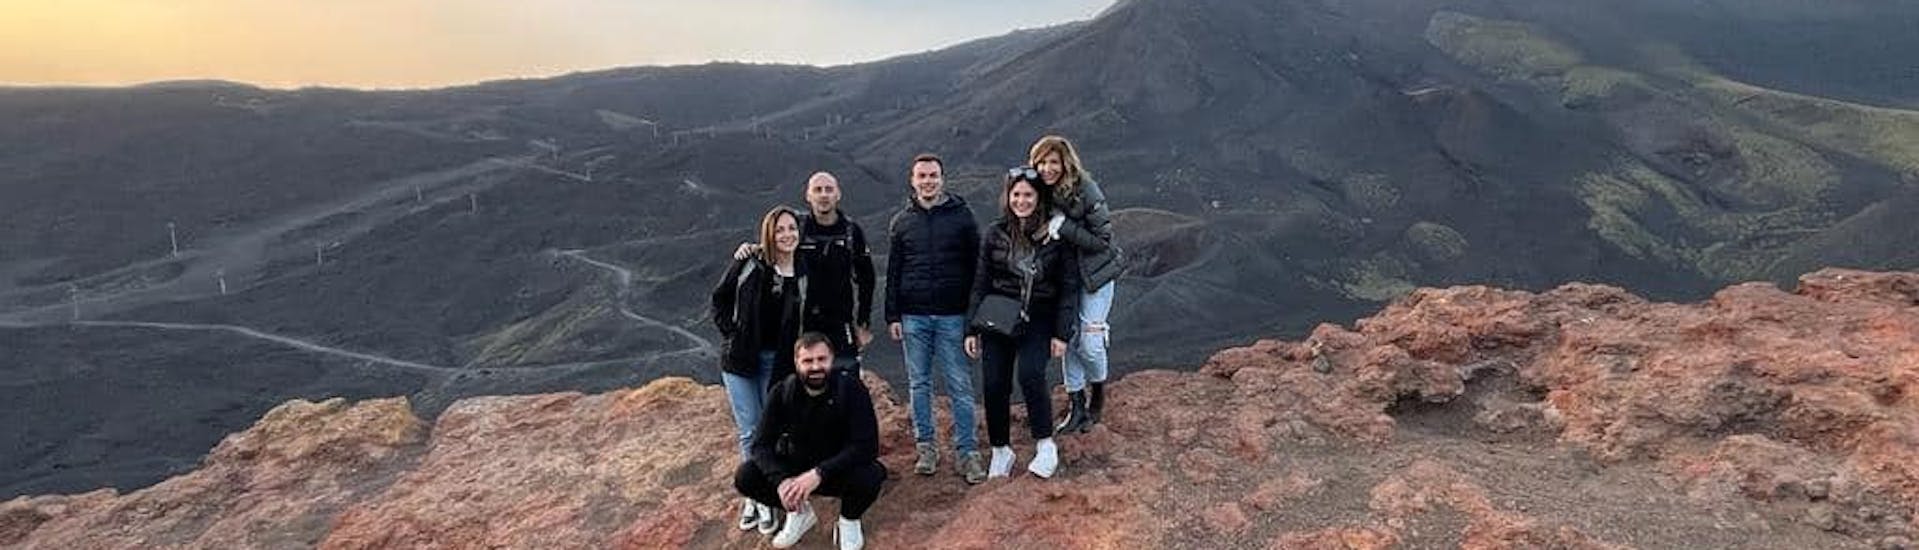 A group of friends smiling on Etna during the Sunset Jeep Tour on Etna with Tasting of Sicilian Products with Etna & Sea Excursions Catania.